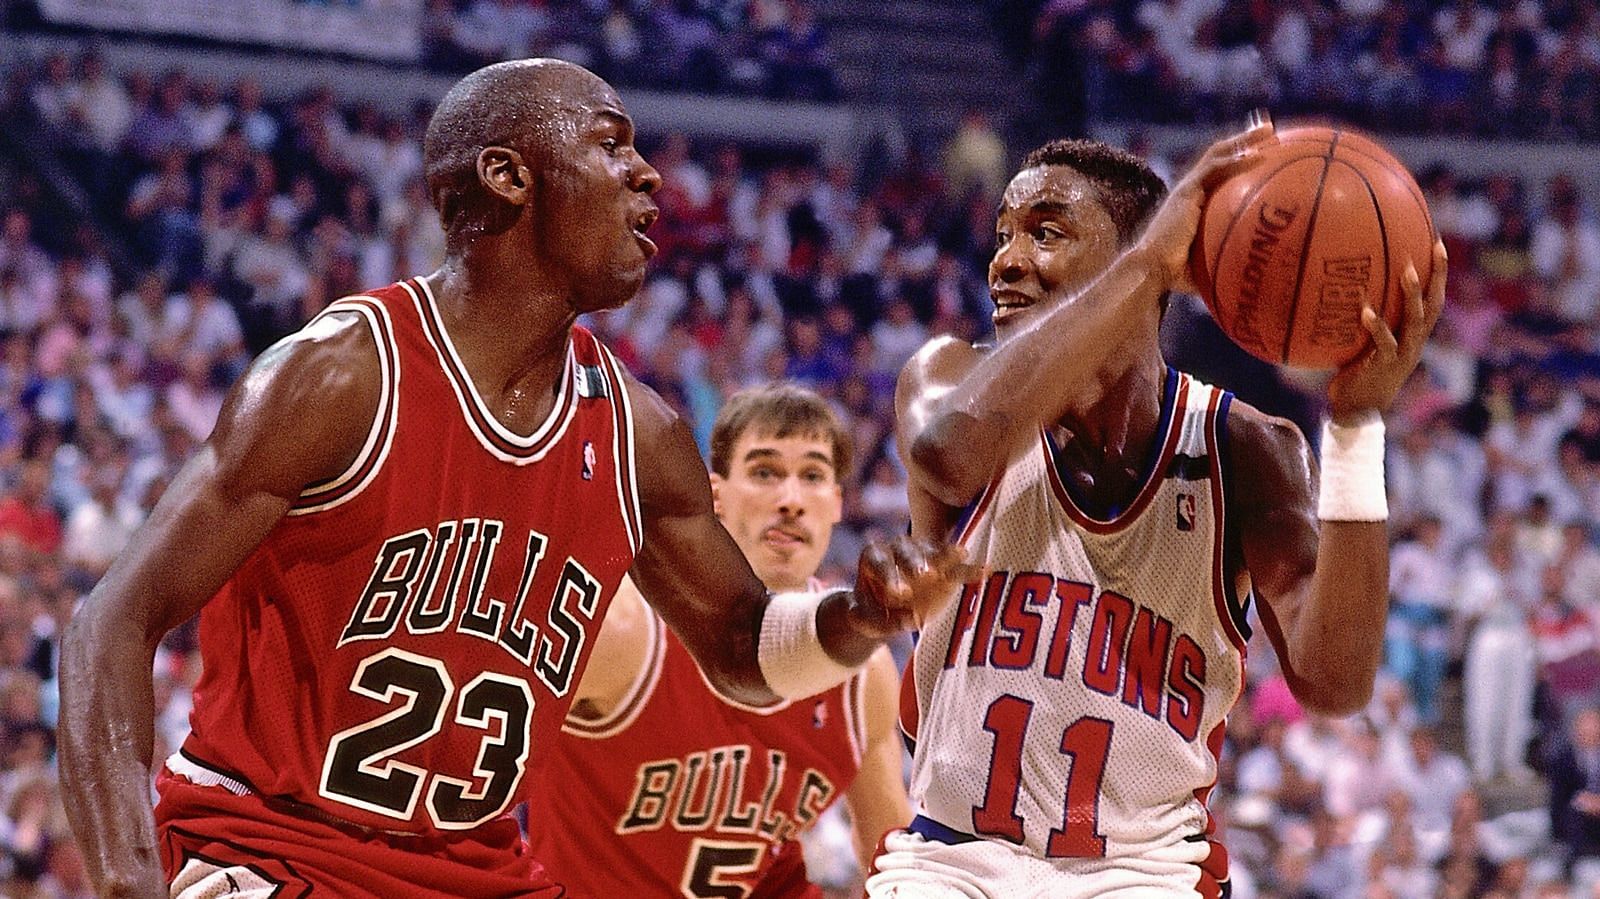 Jordan is not buying Thomas&#039; reason for walking off the court before the Game 4 of the 1991 ECF ended. [Photo: NBA.com]